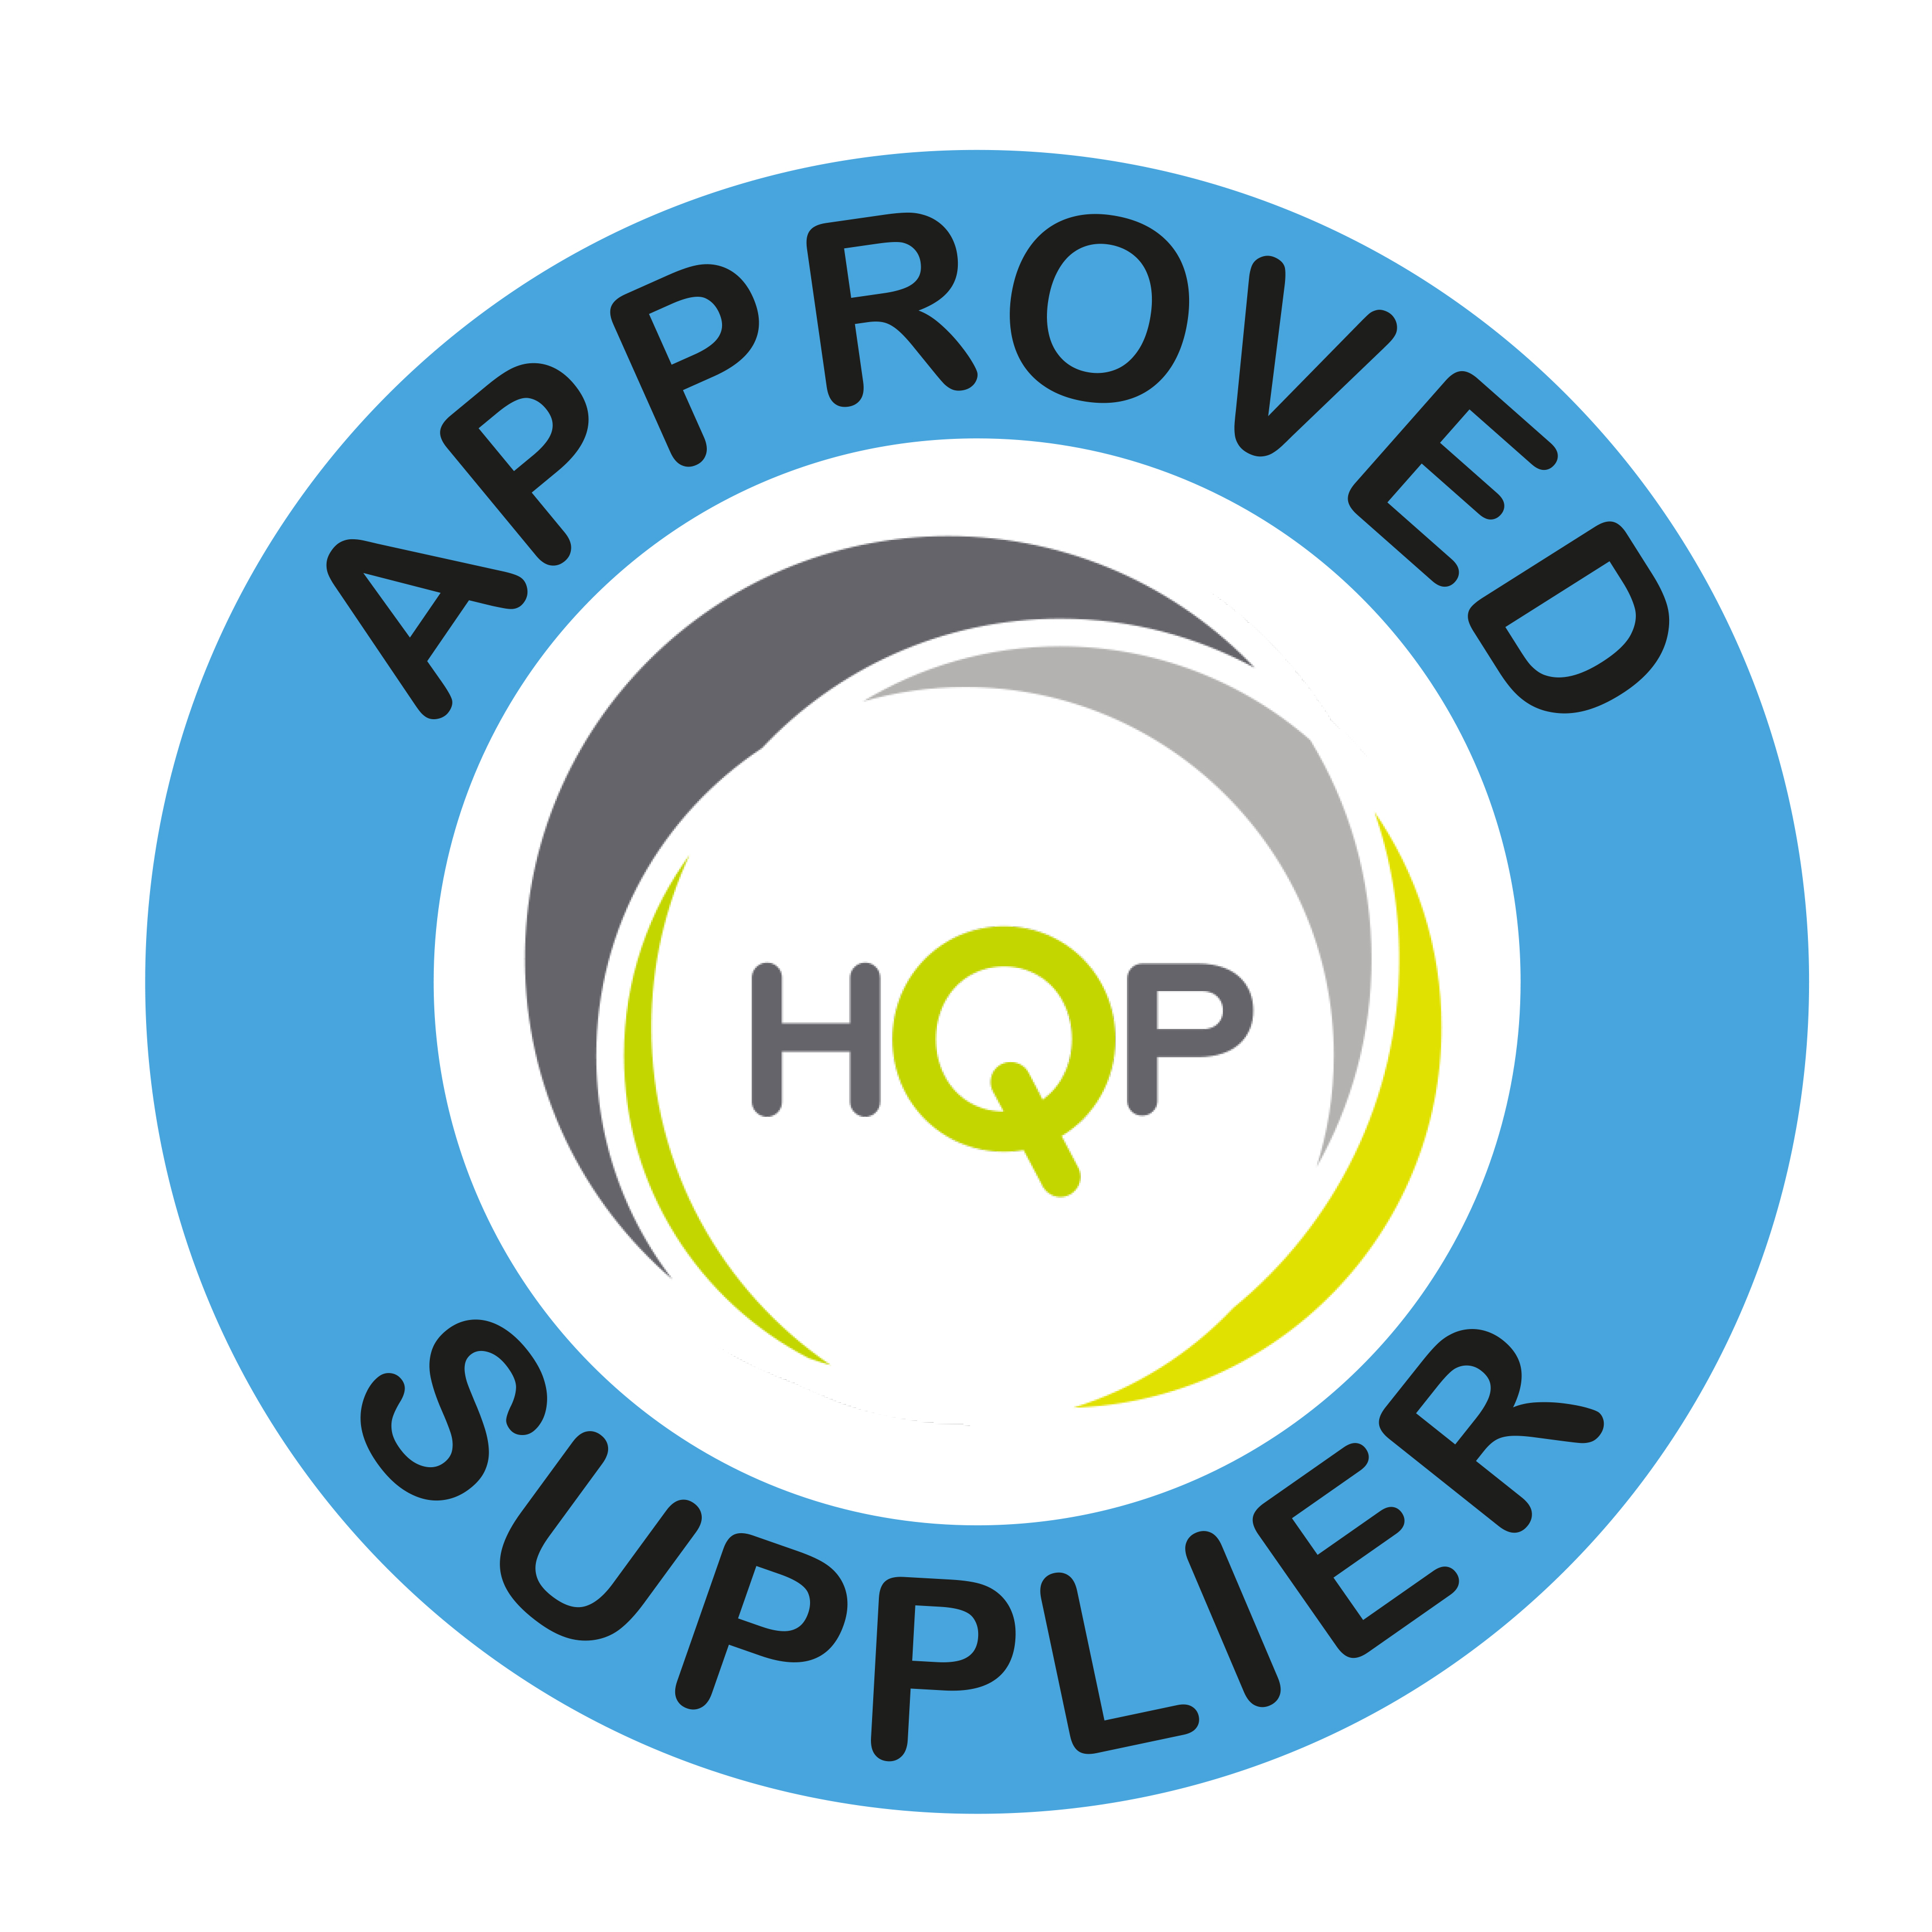 Approved HQP supplier